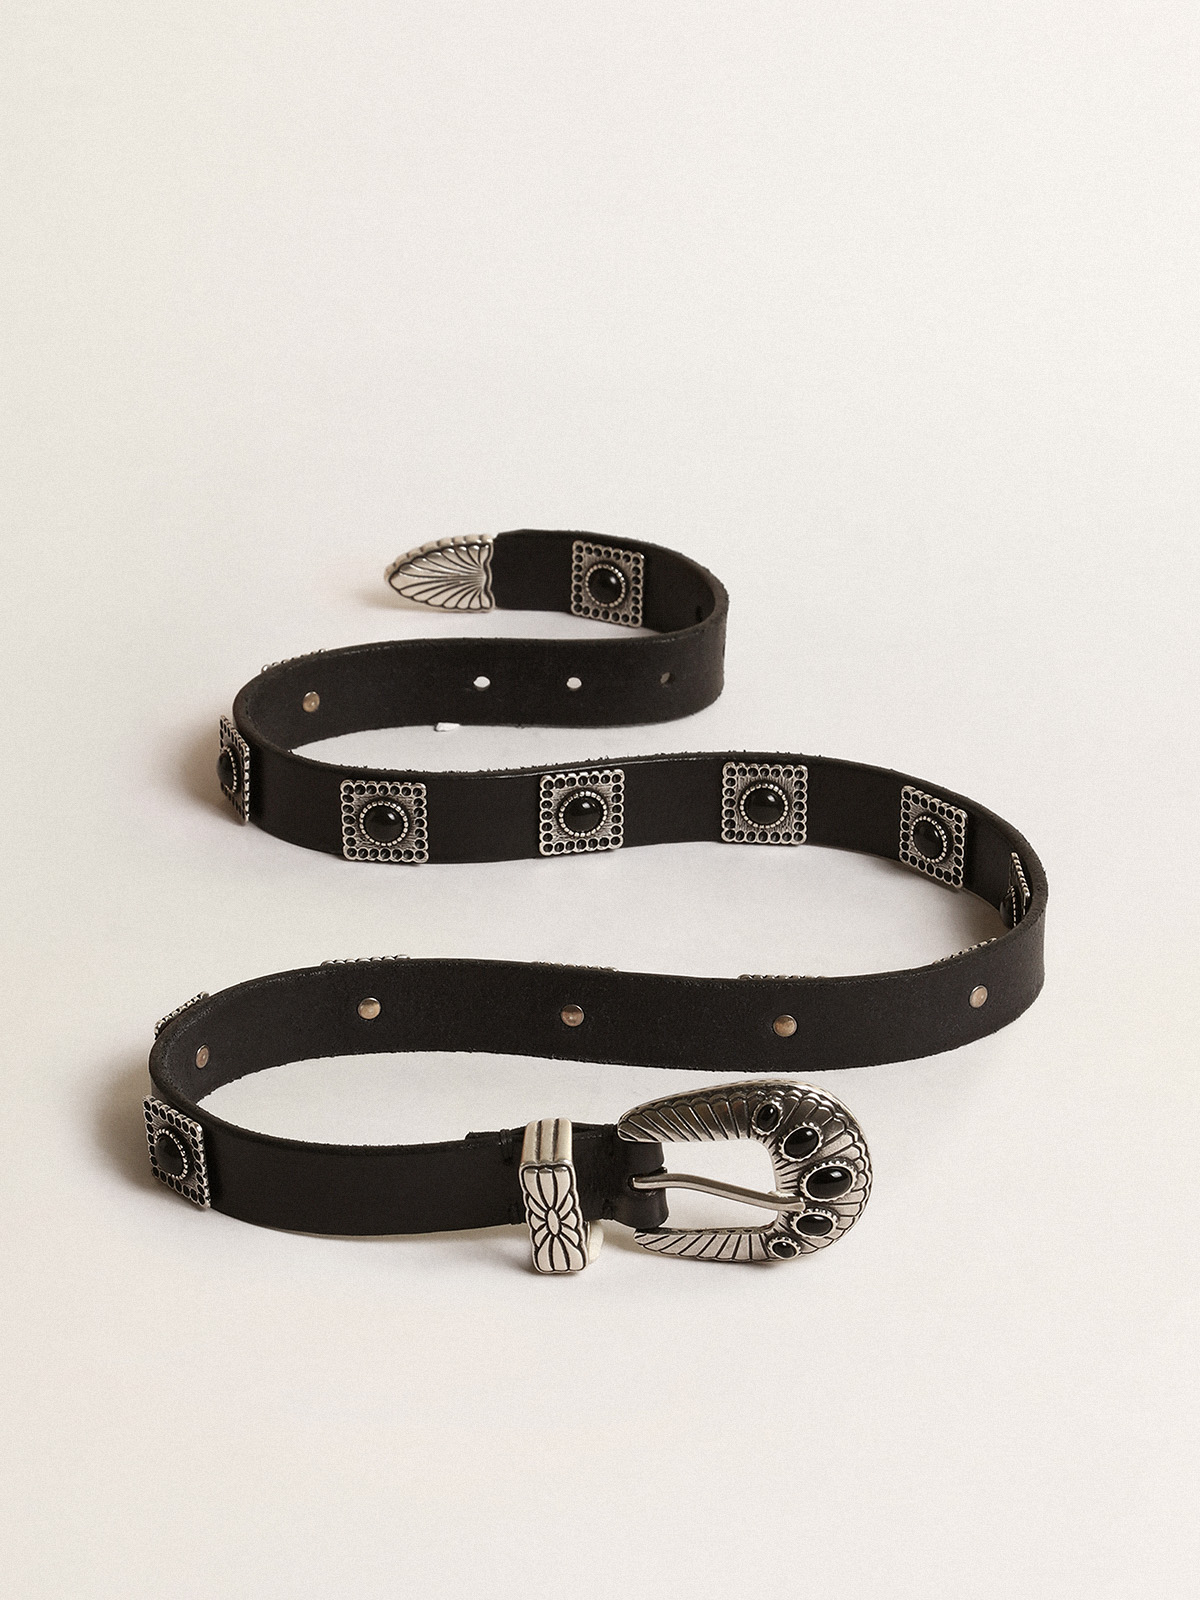 Shell belt in black leather with silver colored studs | Golden Goose